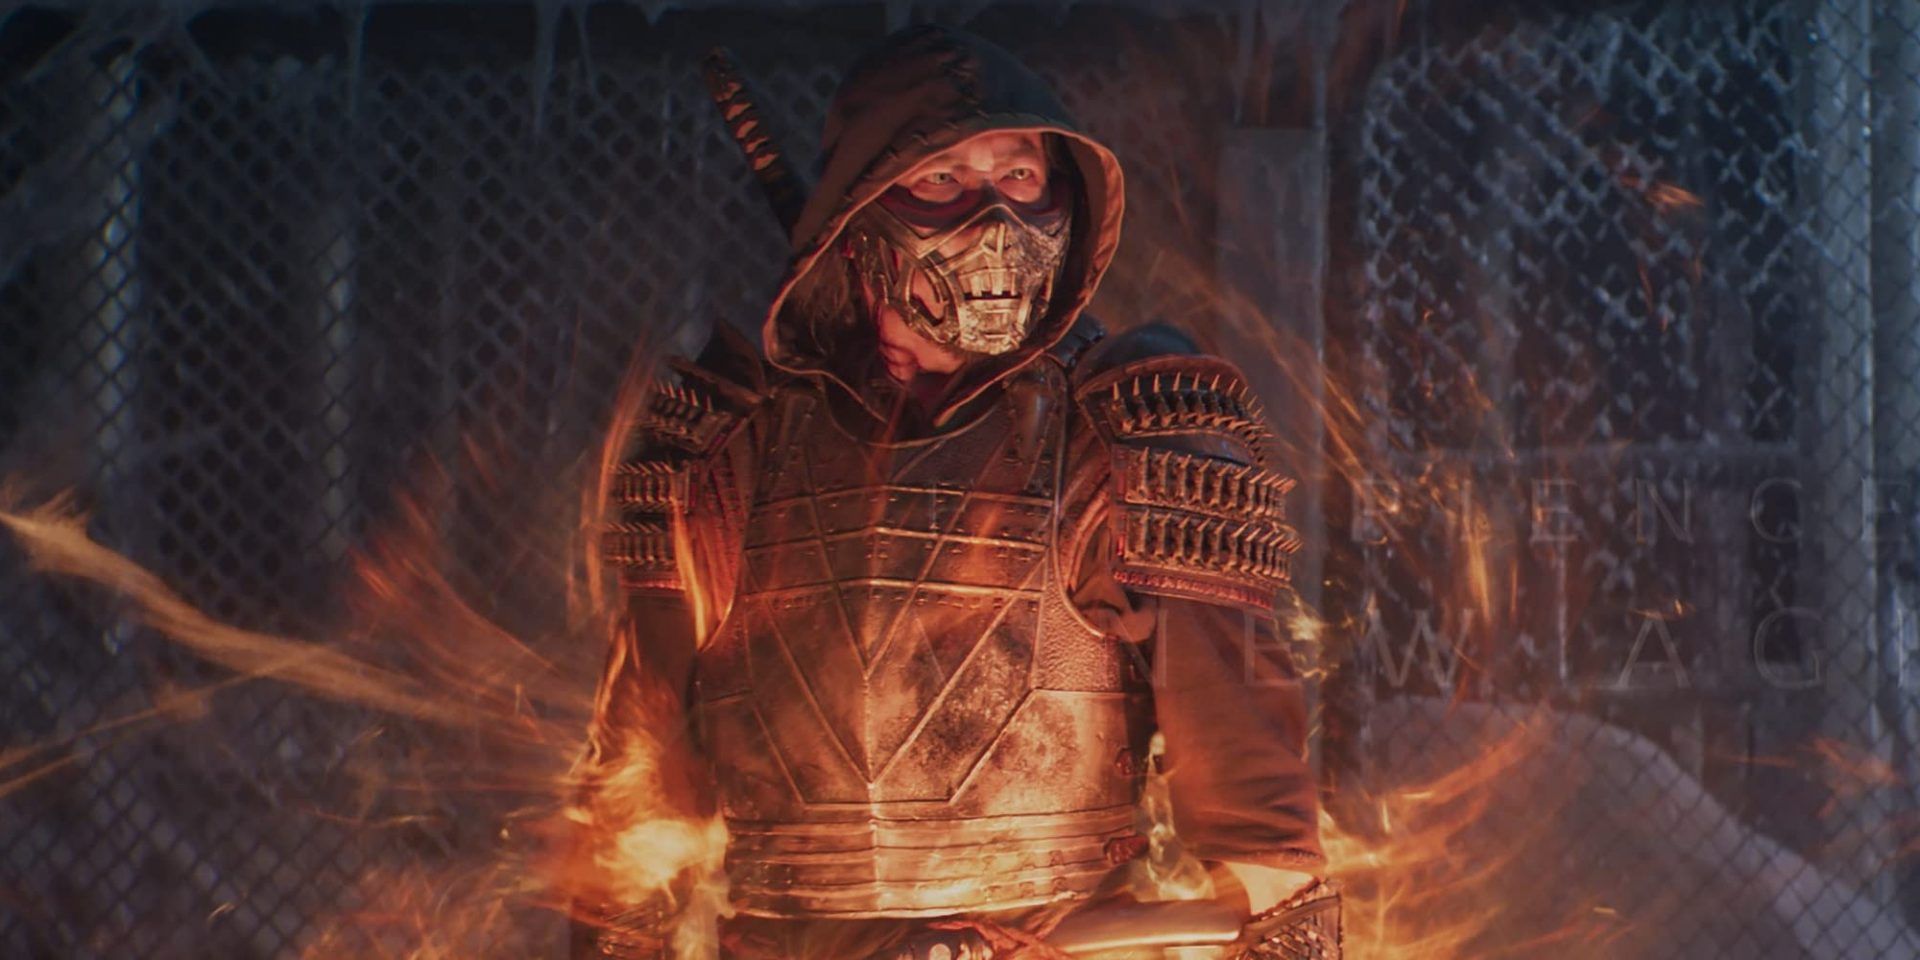 Hiroyuki Sanada as Scorpion in front of an ice-wrapped cage while he is engulfed in fire During A Fight In 2021's Mortal Kombat